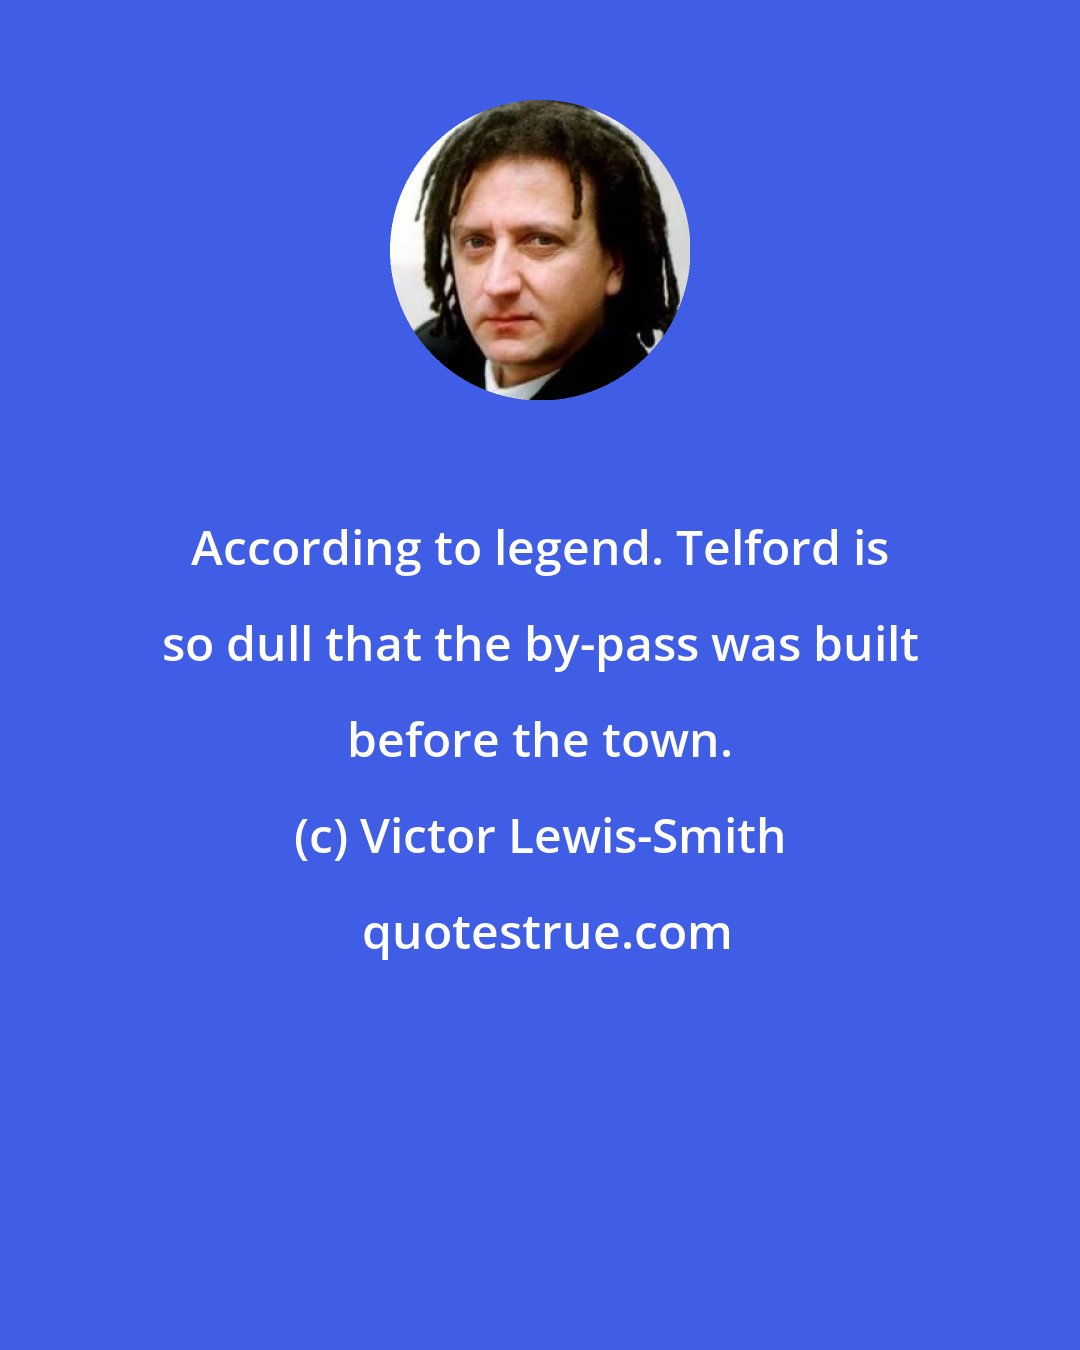 Victor Lewis-Smith: According to legend. Telford is so dull that the by-pass was built before the town.